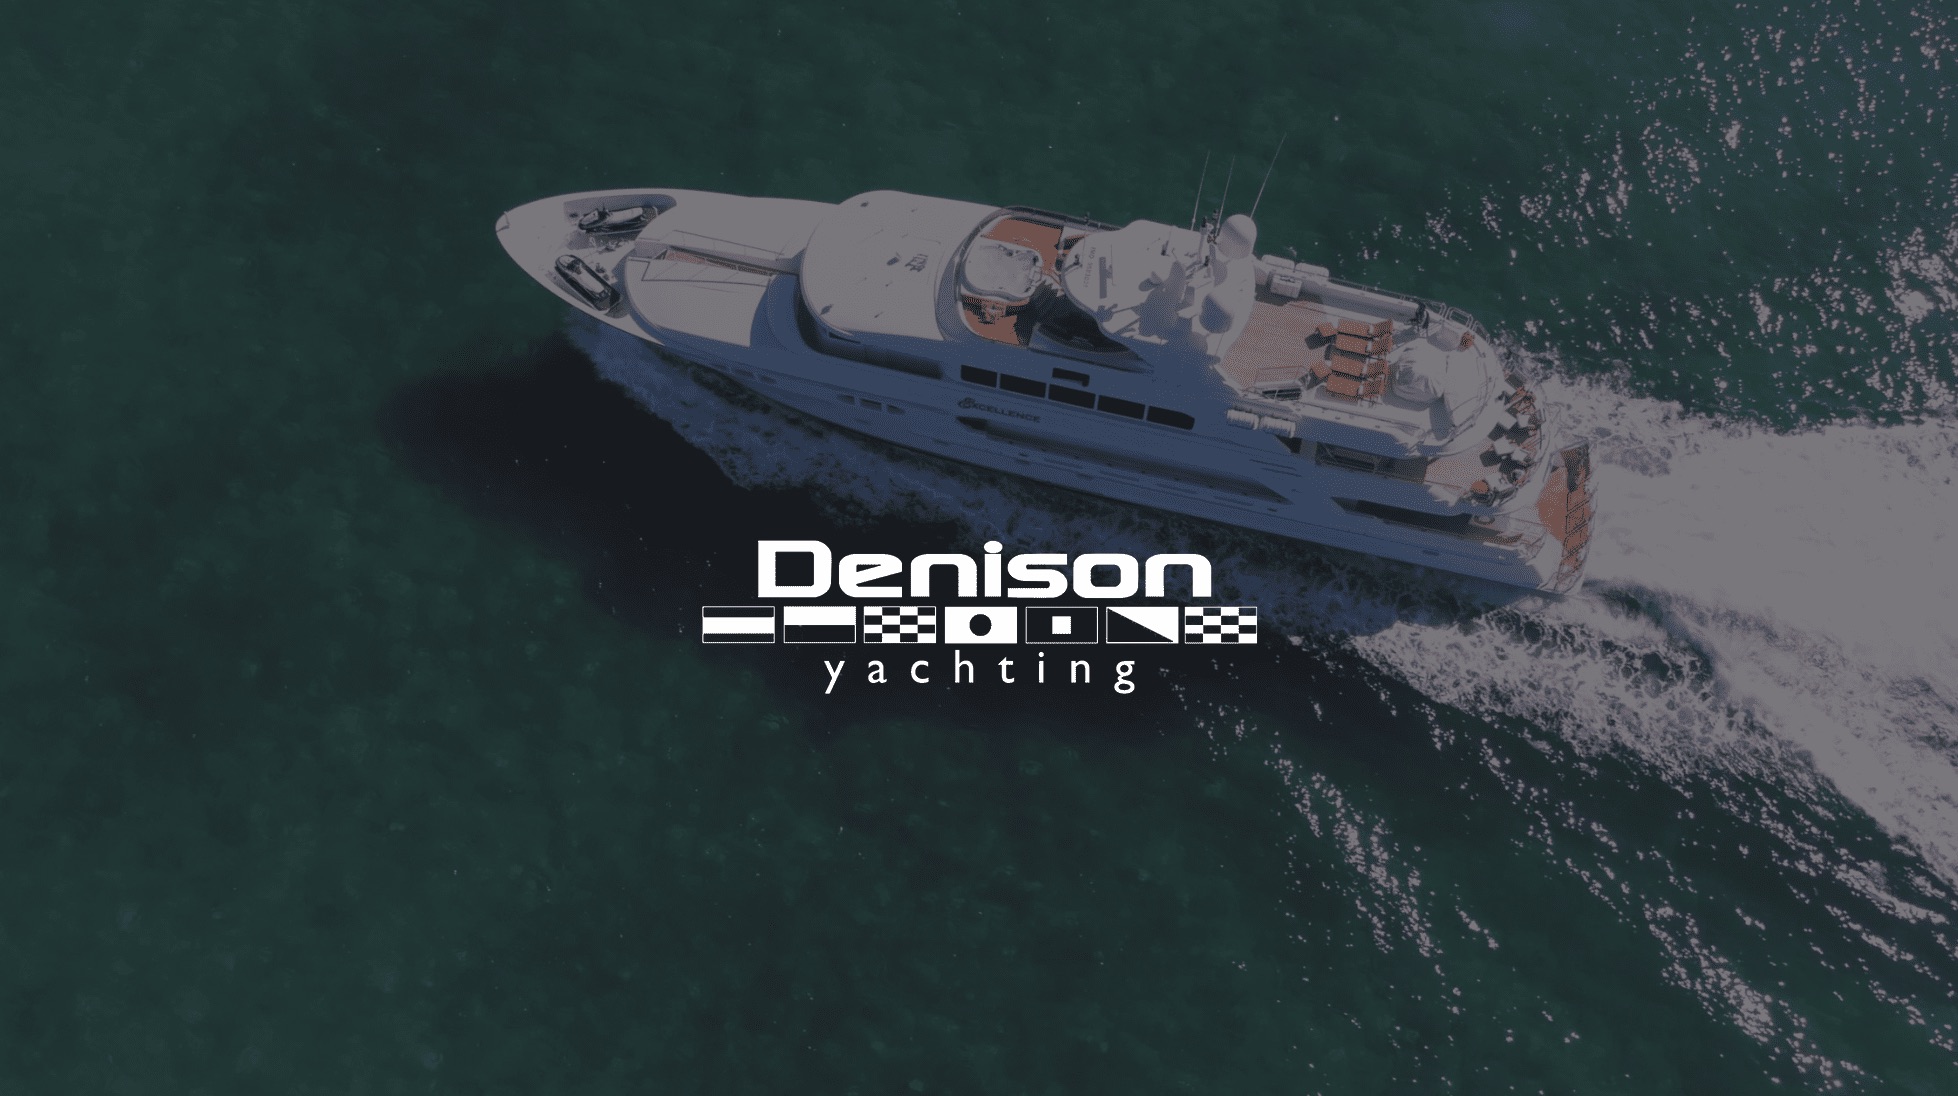 White Denison Yachting logo with an overhead view of a yacht in the background